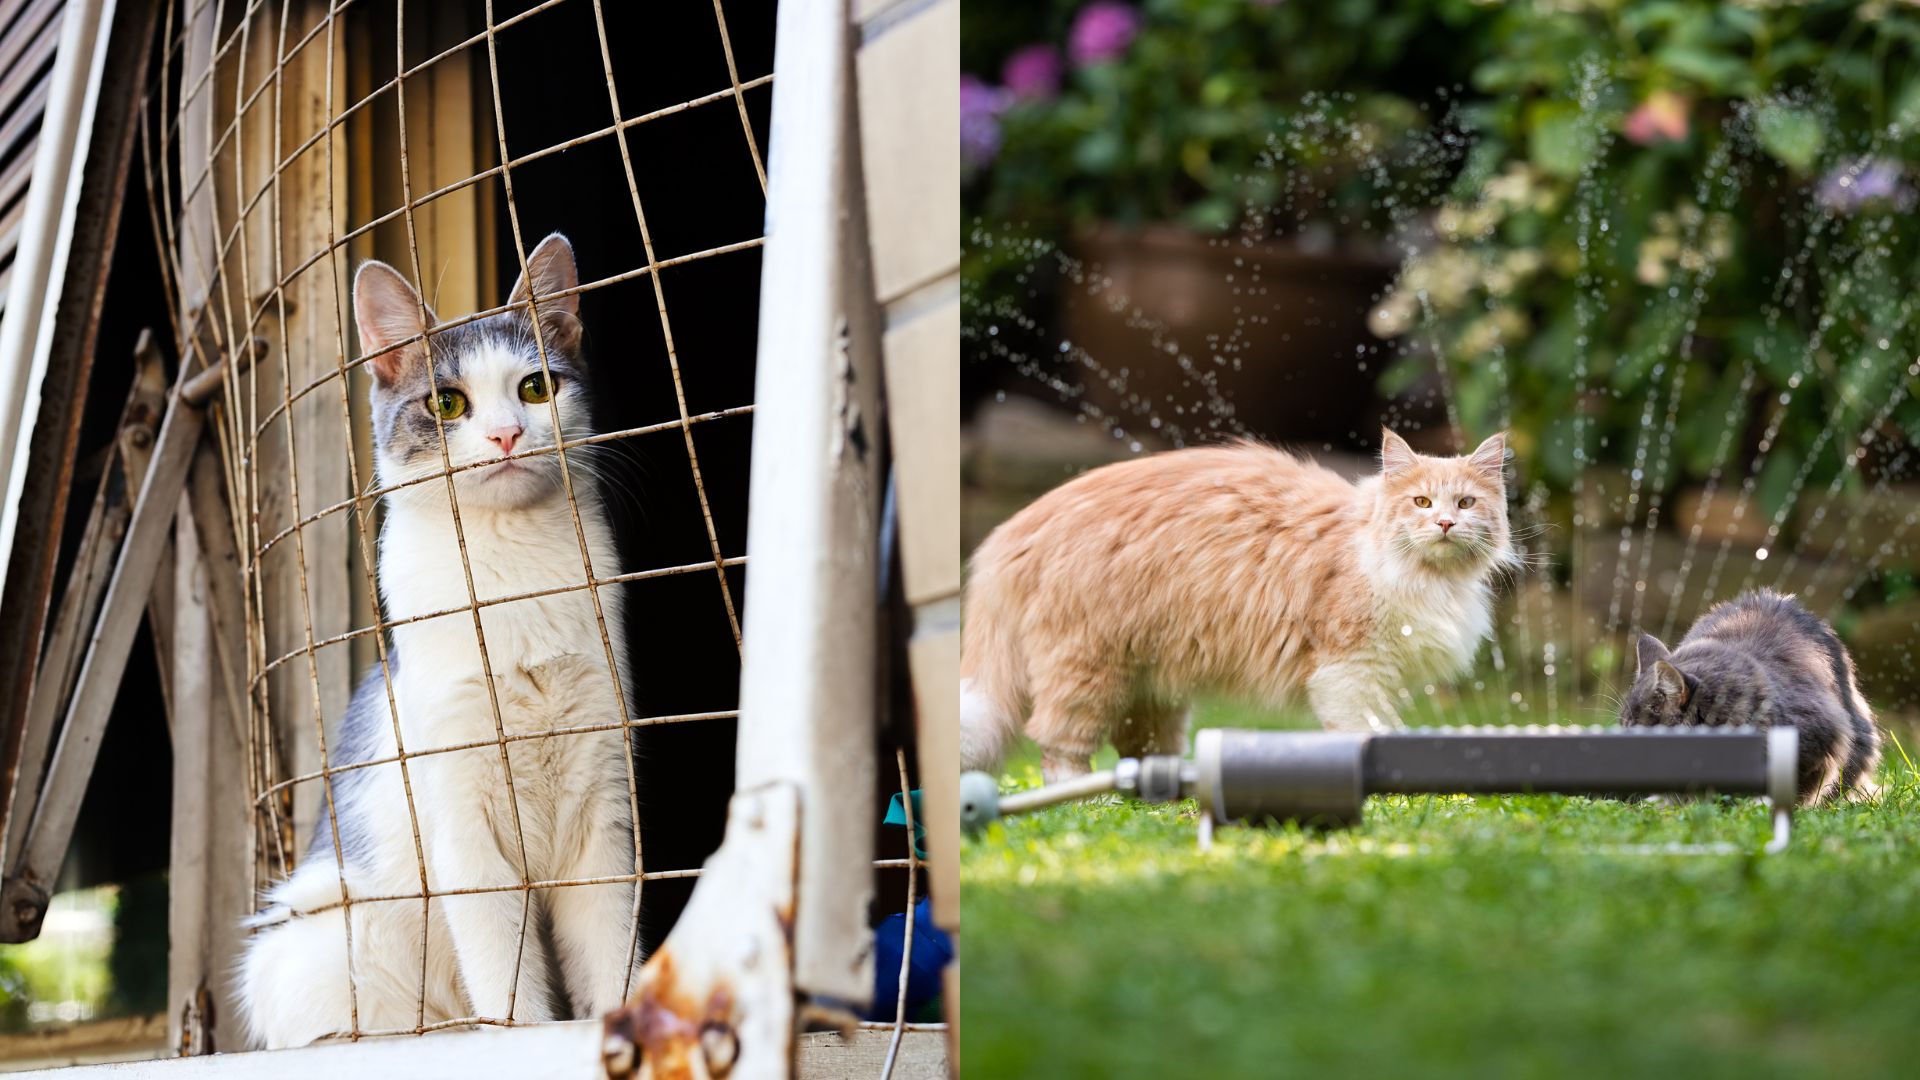 8 Methods For Keeping Cats Out Of Your Yard